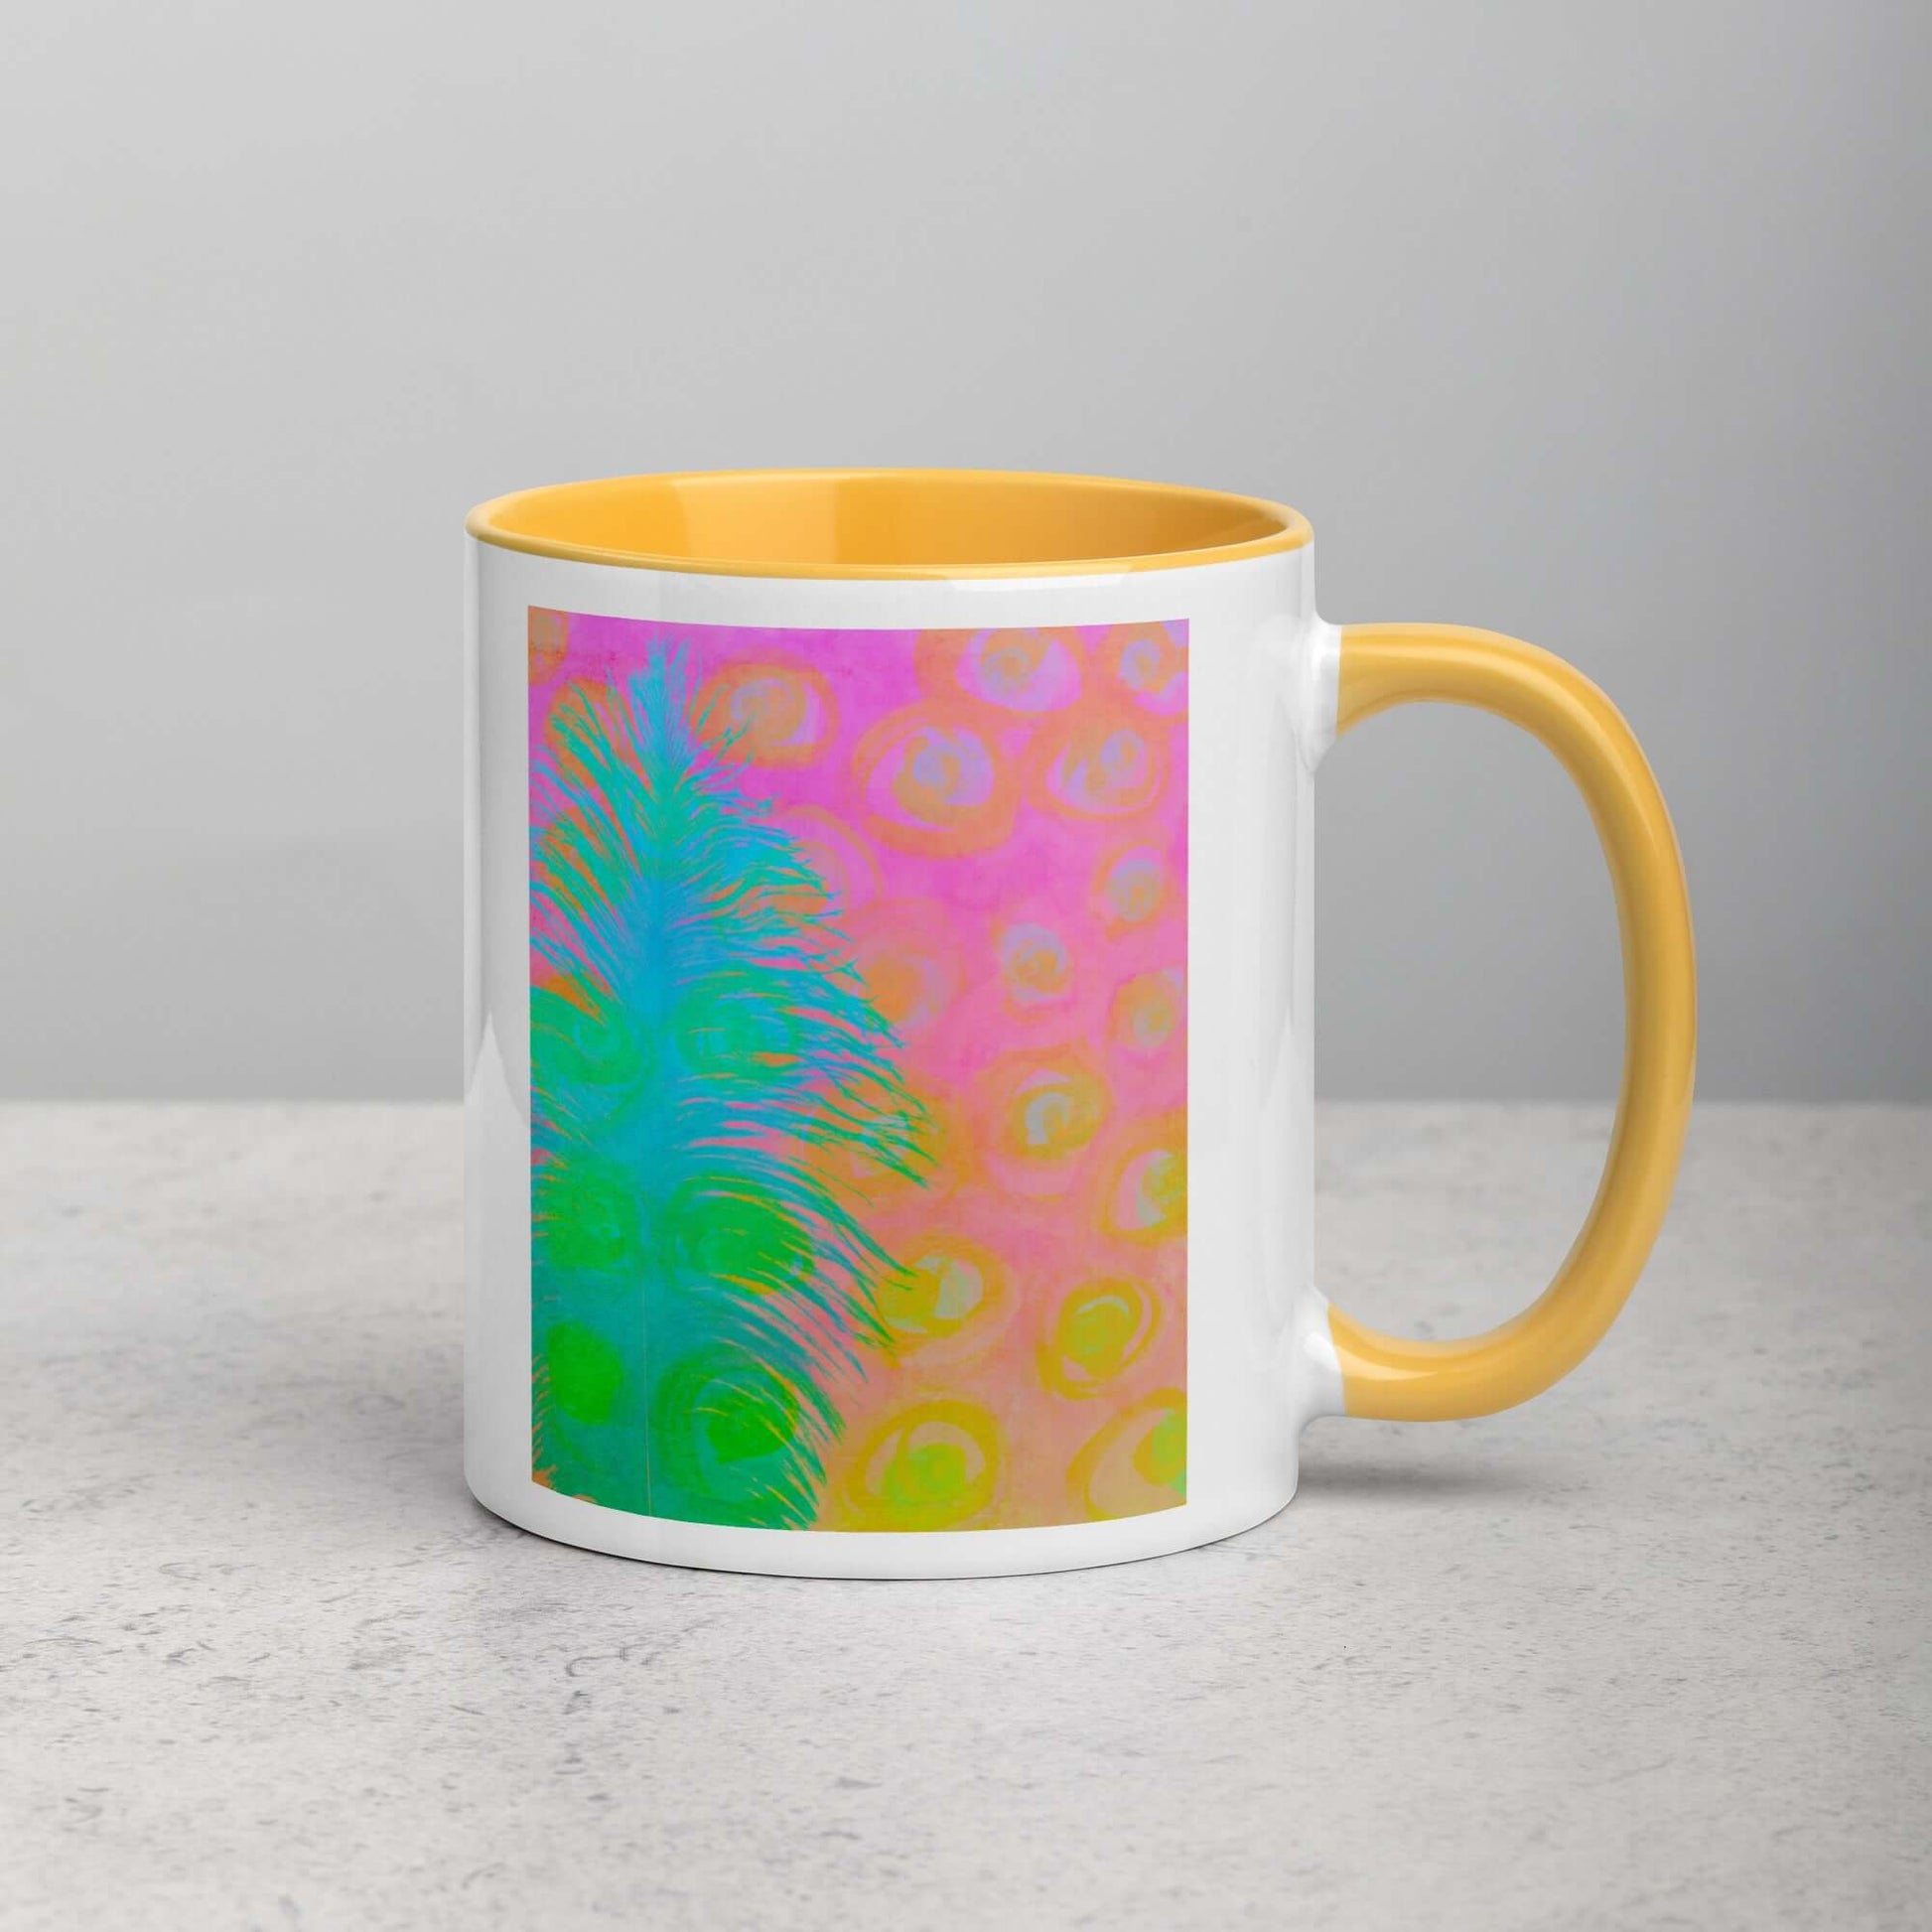 Bright Blue-Green Ostrich Feather on Pink and Yellow Background “My Other Half” Abstract Art Mug with Golden Yellow Color Inside Right Handed Front View